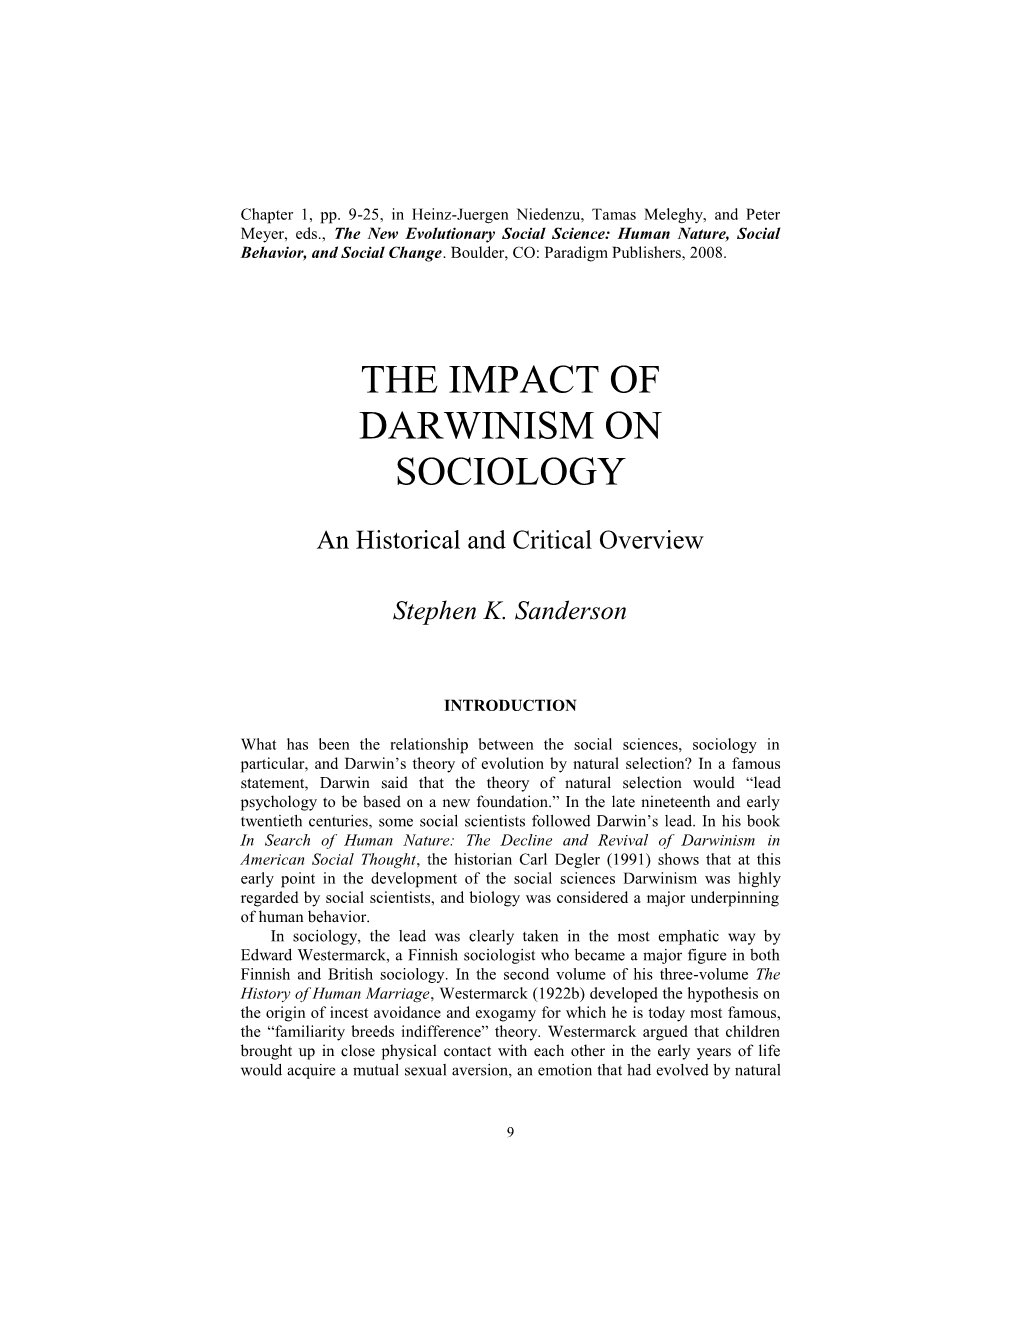 The Impact of Darwinism on Sociology